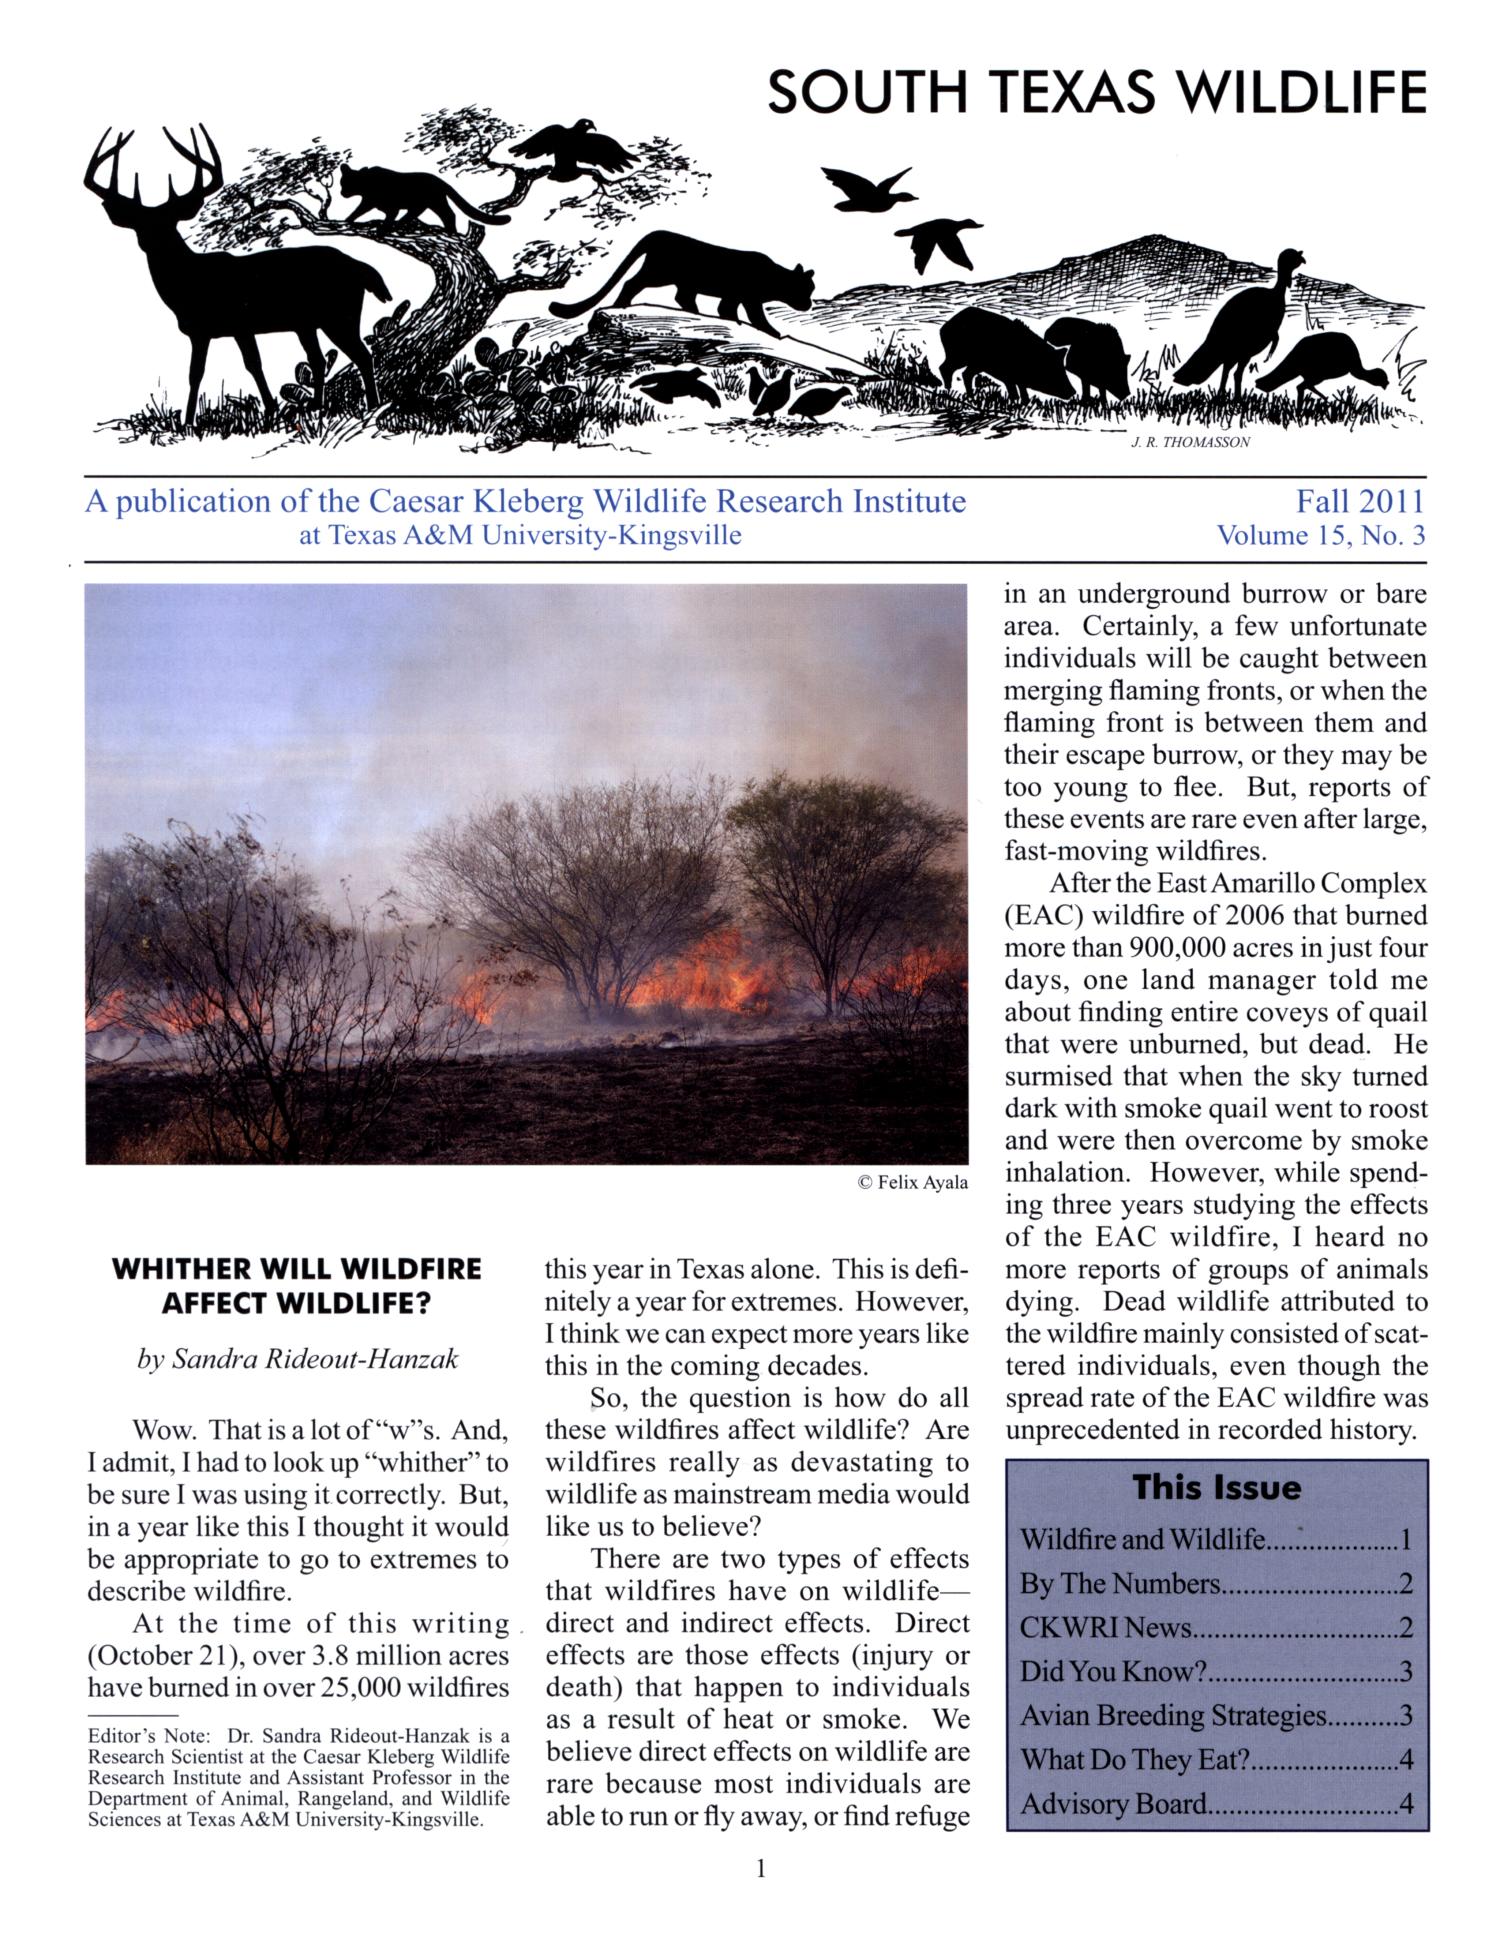 South Texas Wildlife, Volume 15, Number 3, Fall 2011
                                                
                                                    1
                                                